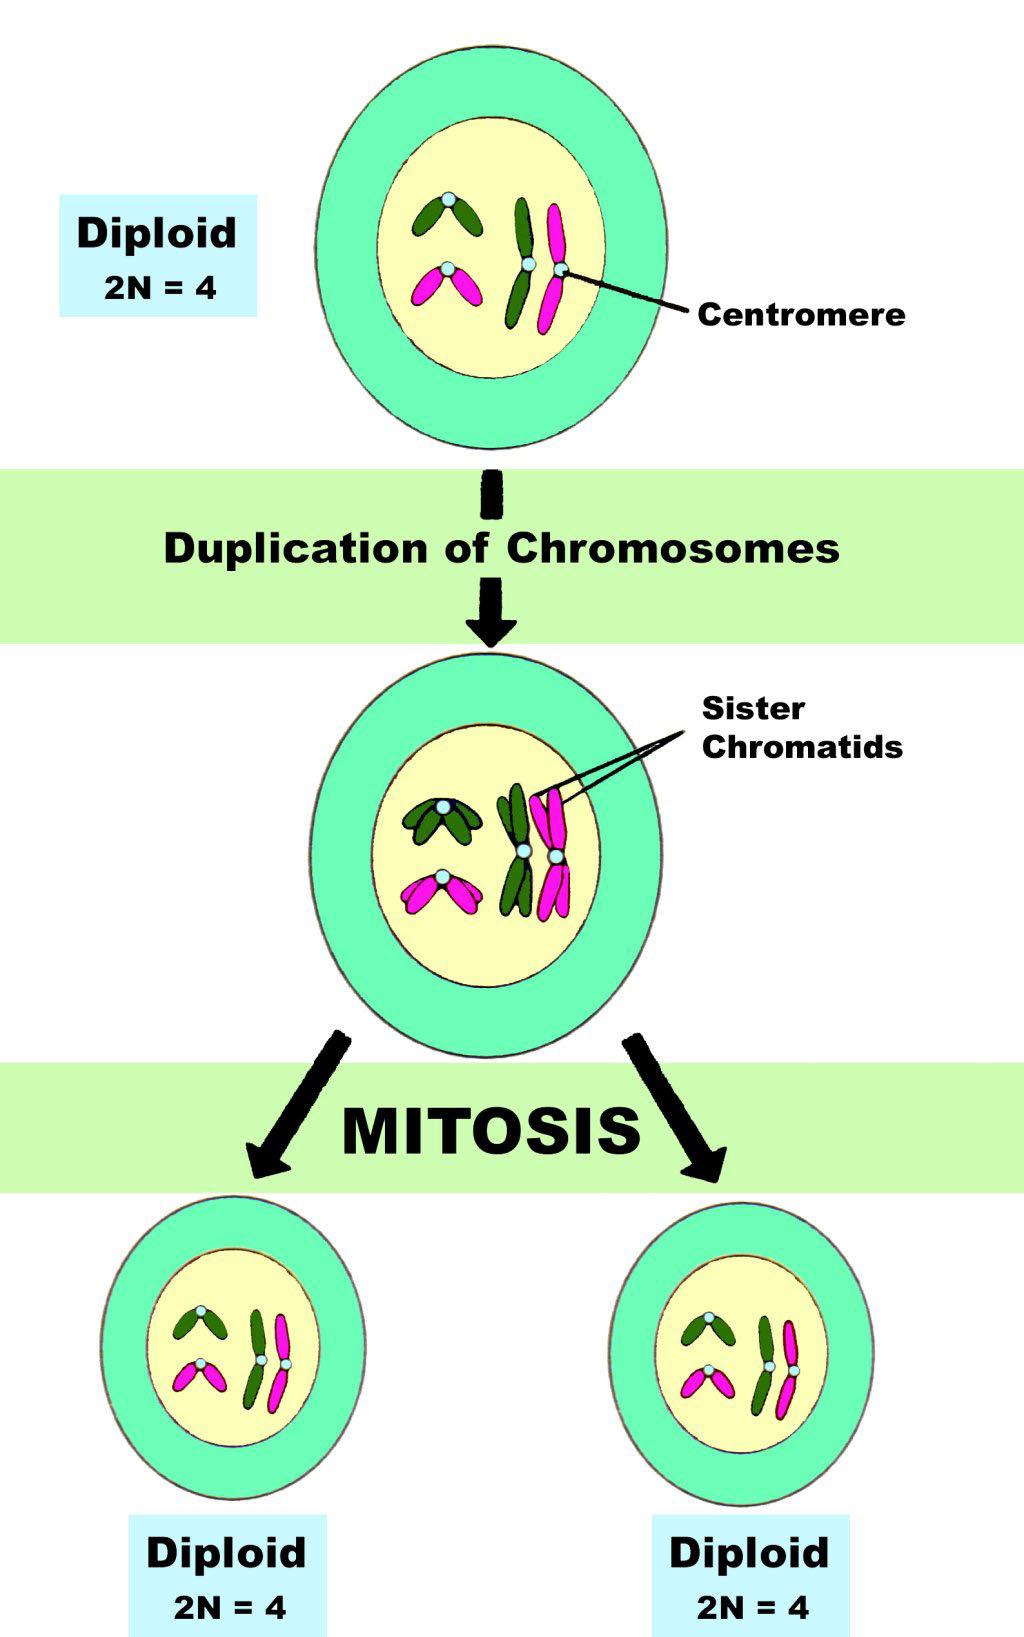 Mitosis involves one duplication and one division of chromatin (Fig. 20-5). The duplication, replication, occurs during the S phase and the division during M phase.